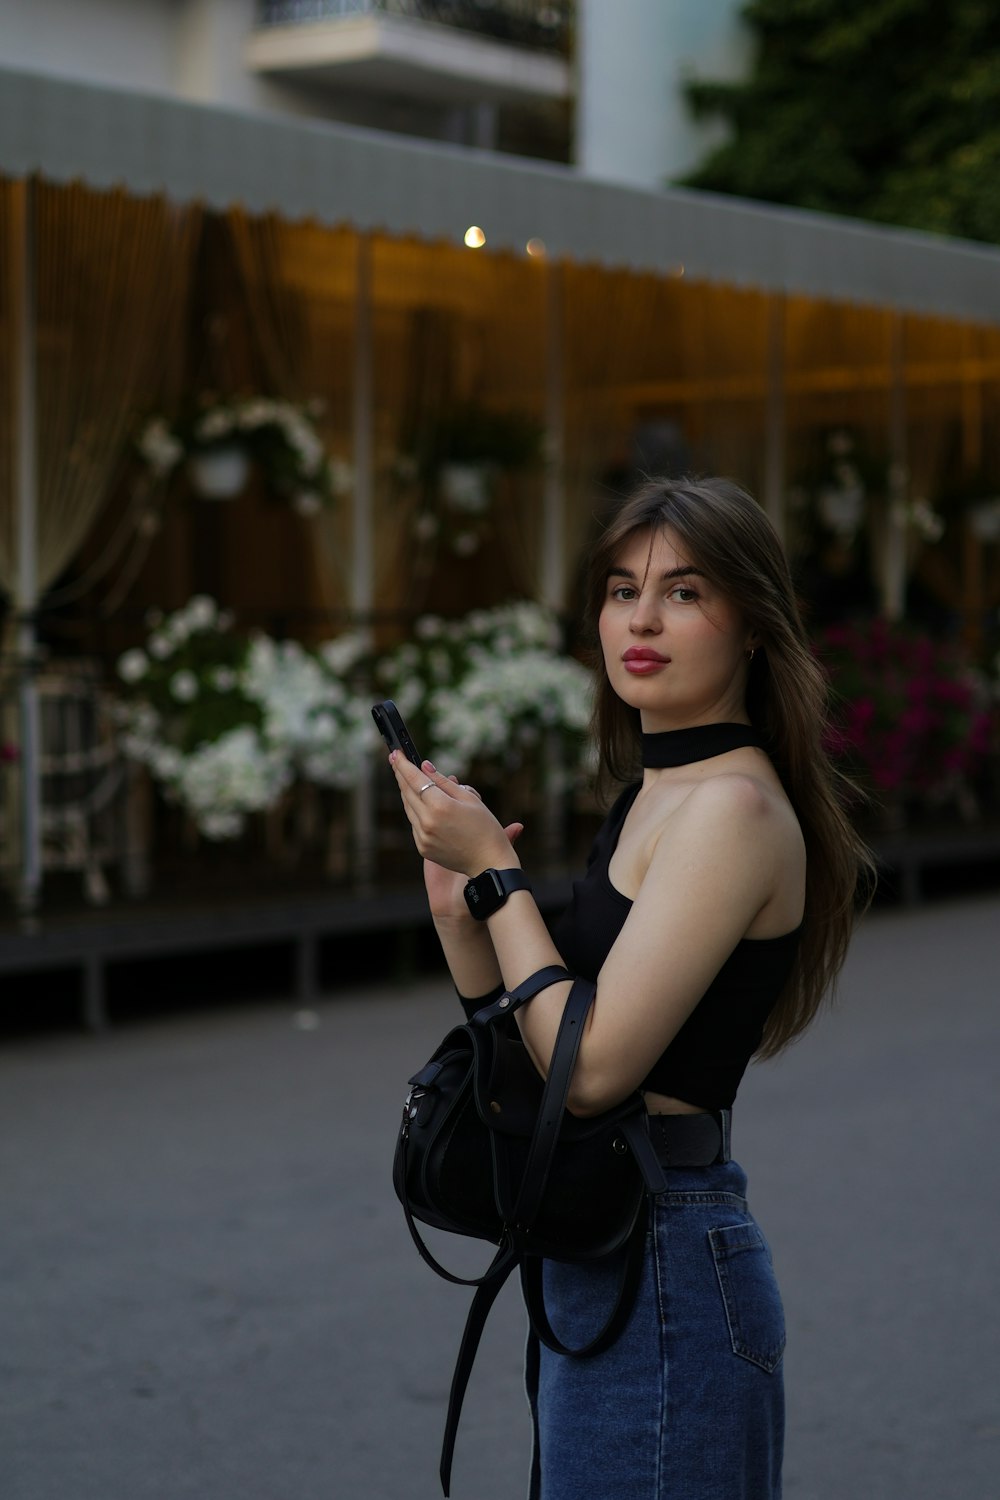 a woman in a black top is holding a cell phone